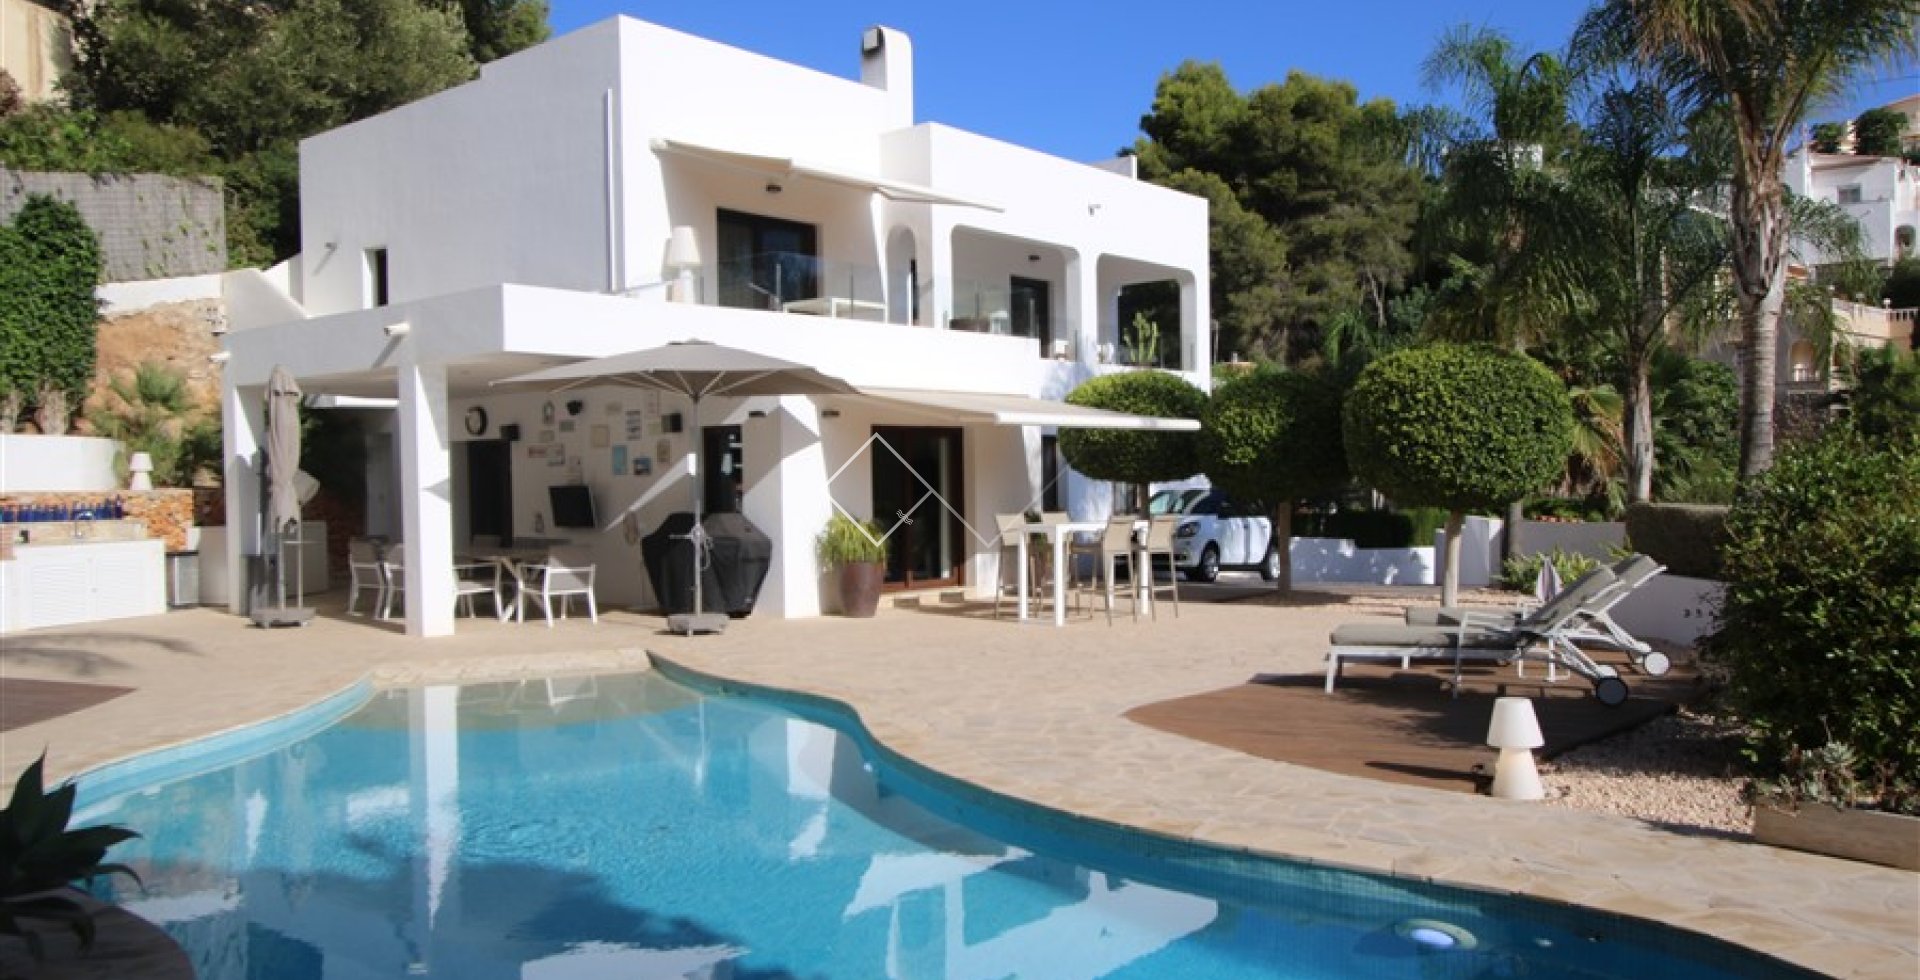 Ibiza villa for sale in Benissa with heated pool